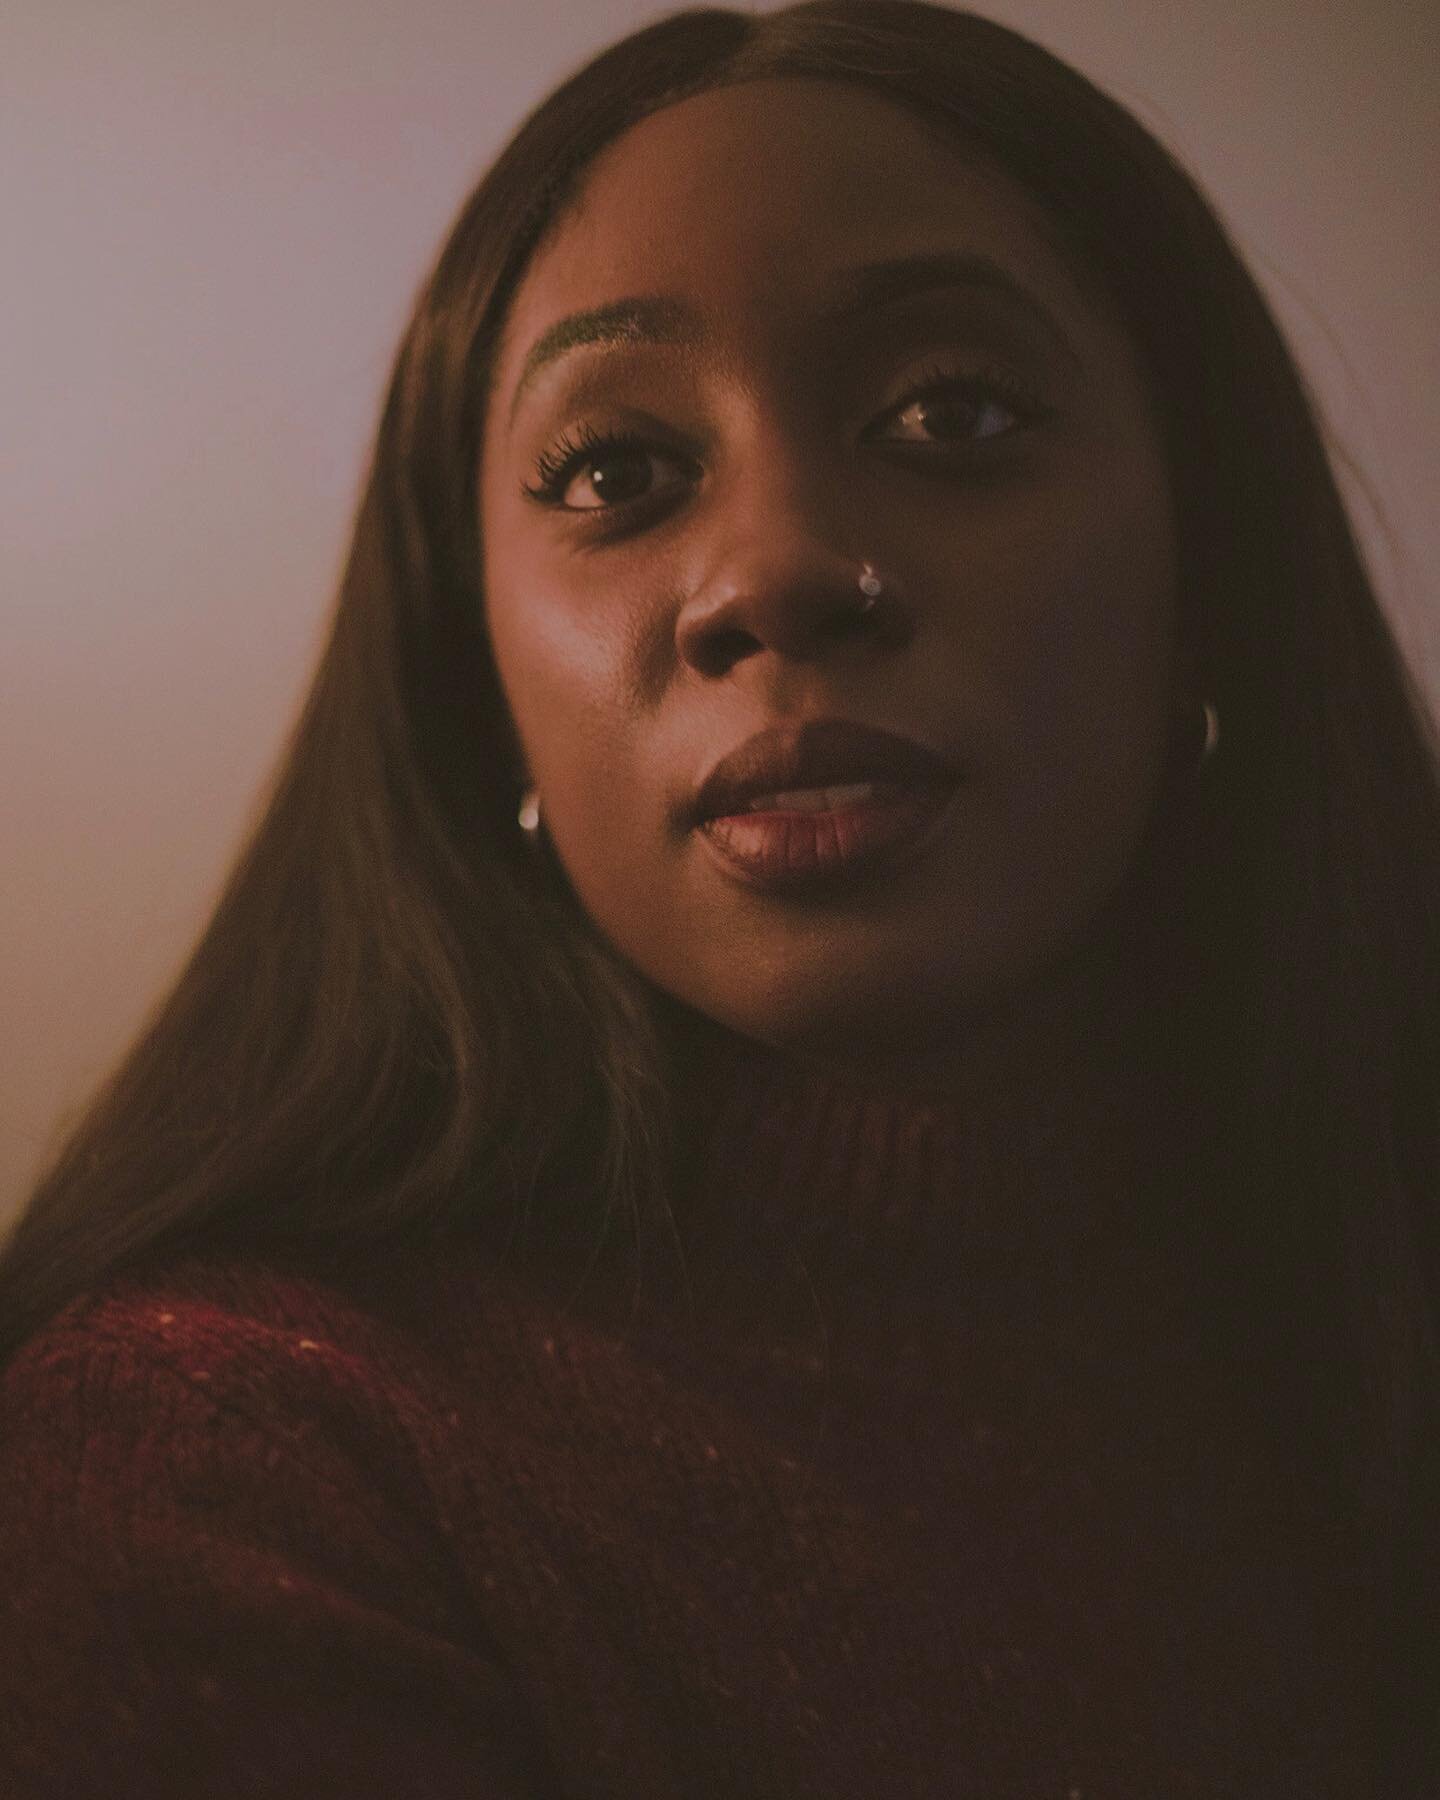 my favourite frame from a portrait shoot with this angel in my bedroom, lit up by just two candles. just look at her. my heart.⠀⠀⠀⠀⠀⠀⠀⠀⠀
⠀⠀⠀⠀⠀⠀⠀⠀⠀
(image description: a portrait of a woman from the shoulders up in a red jumper. she has long black hai